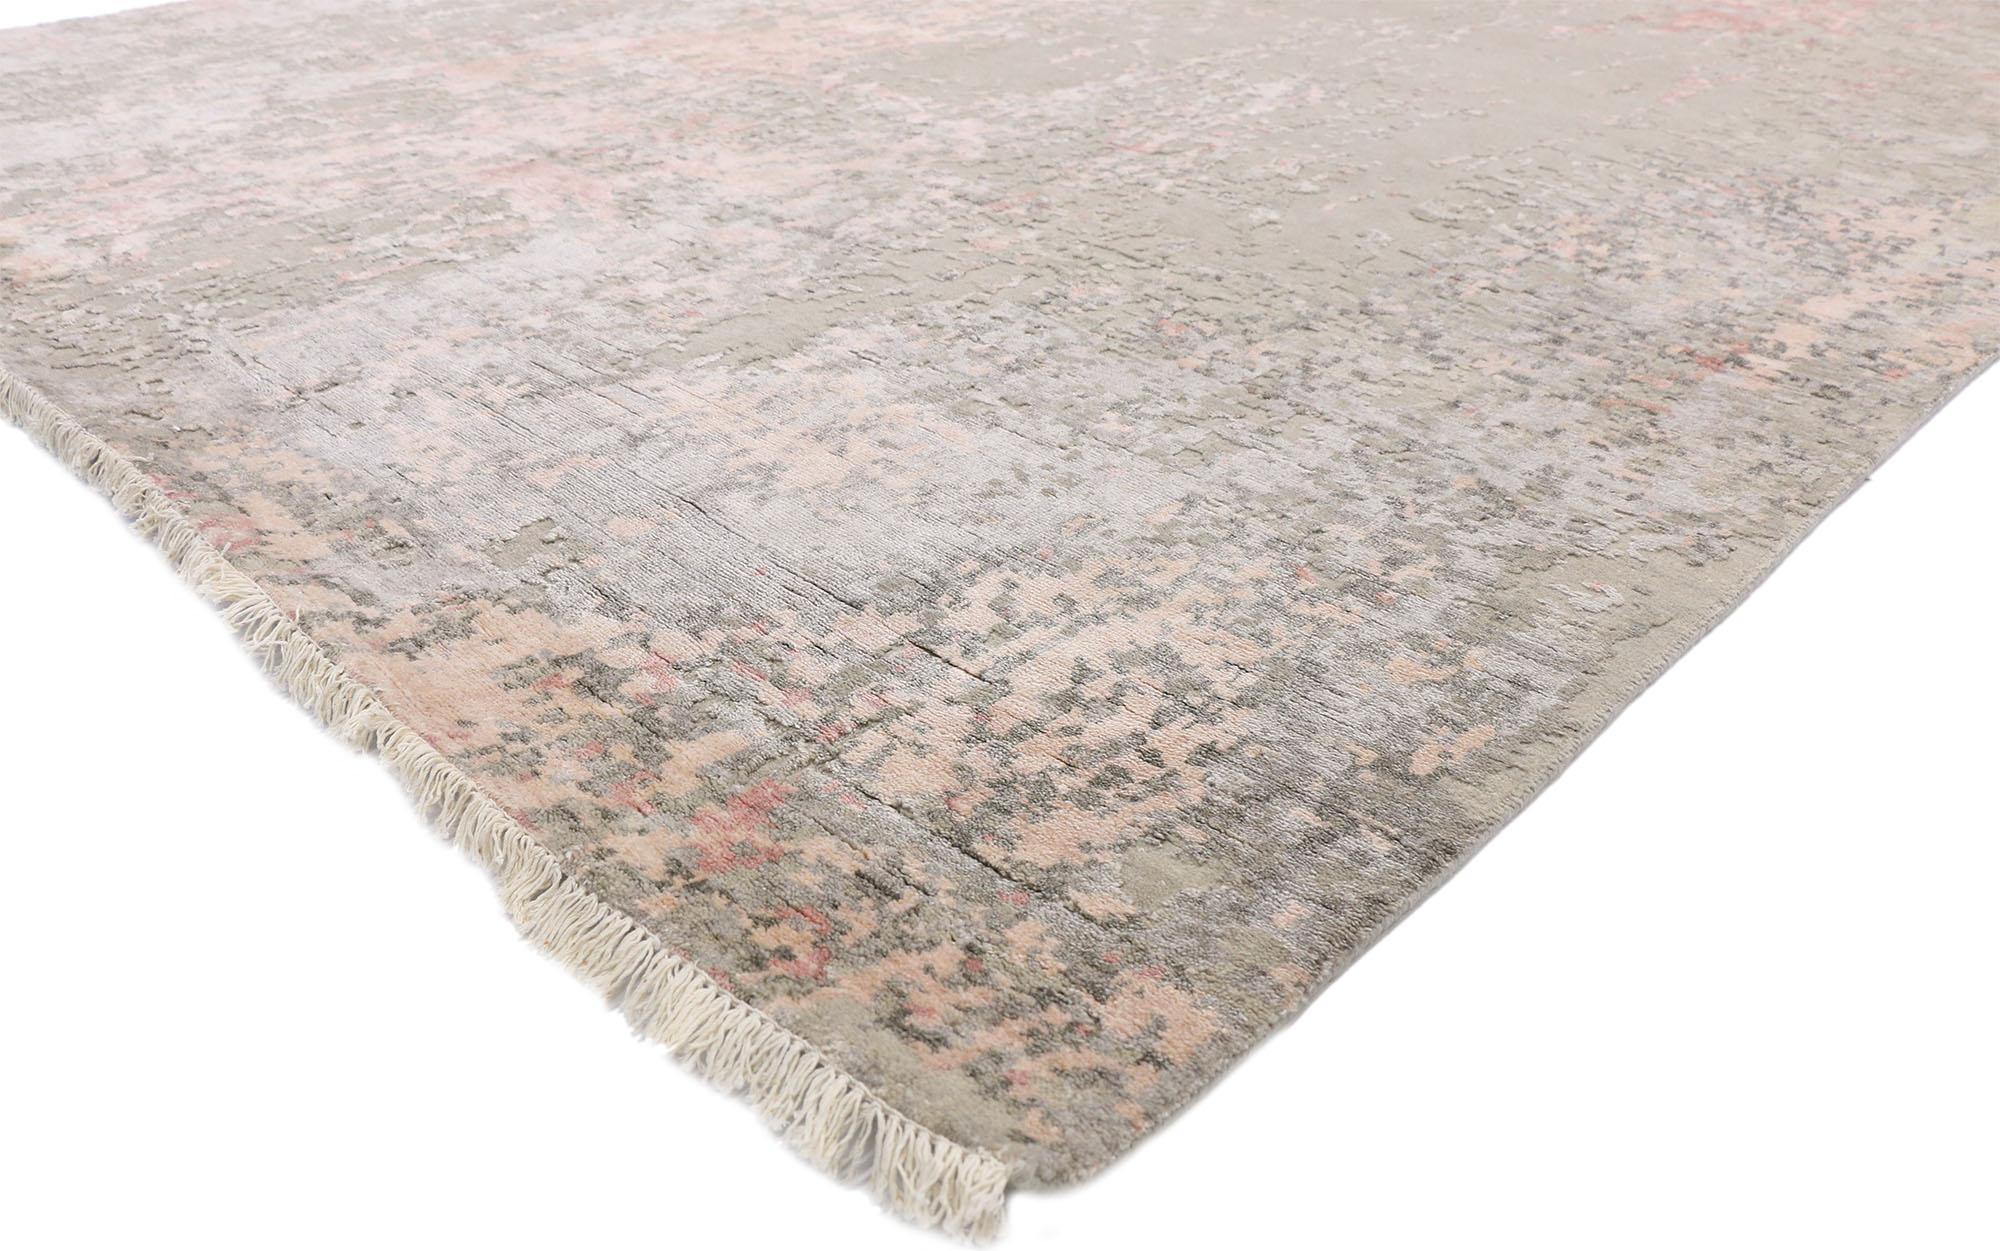 30410 New Contemporary Abstract Transitional Rug Inspired by Willem de Kooning with Grunge Art & Romantic Postmodern style. This hand knotted silk and wool contemporary abstract area rug with postmodern Romanticism style is the epitome of relaxed